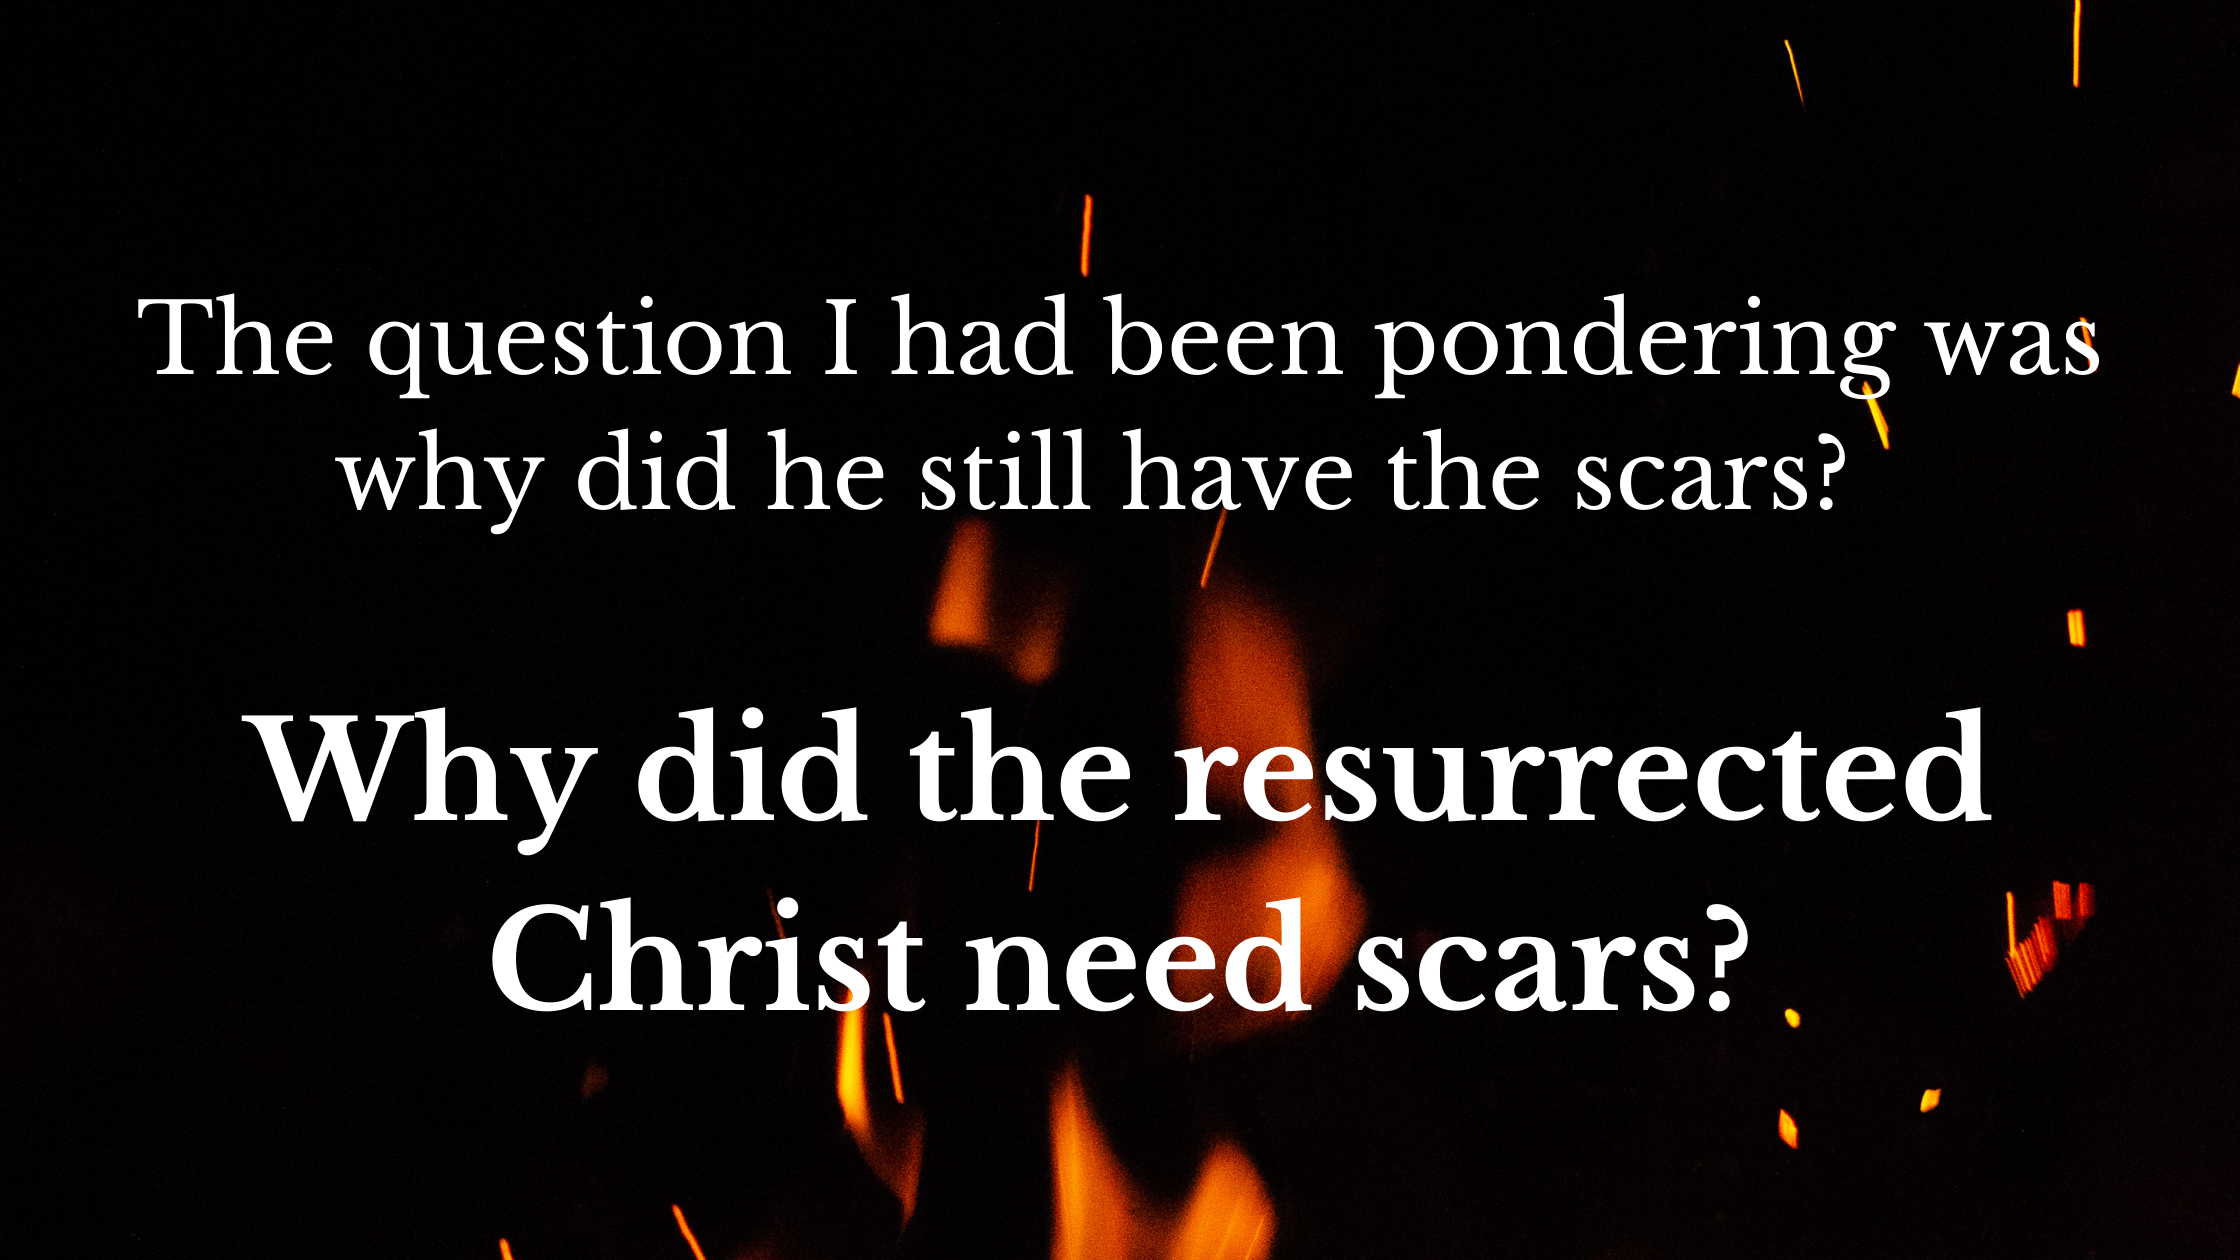 The question I had been pondering was why did he still have the scars? Why did the resurrected Christ need scars?